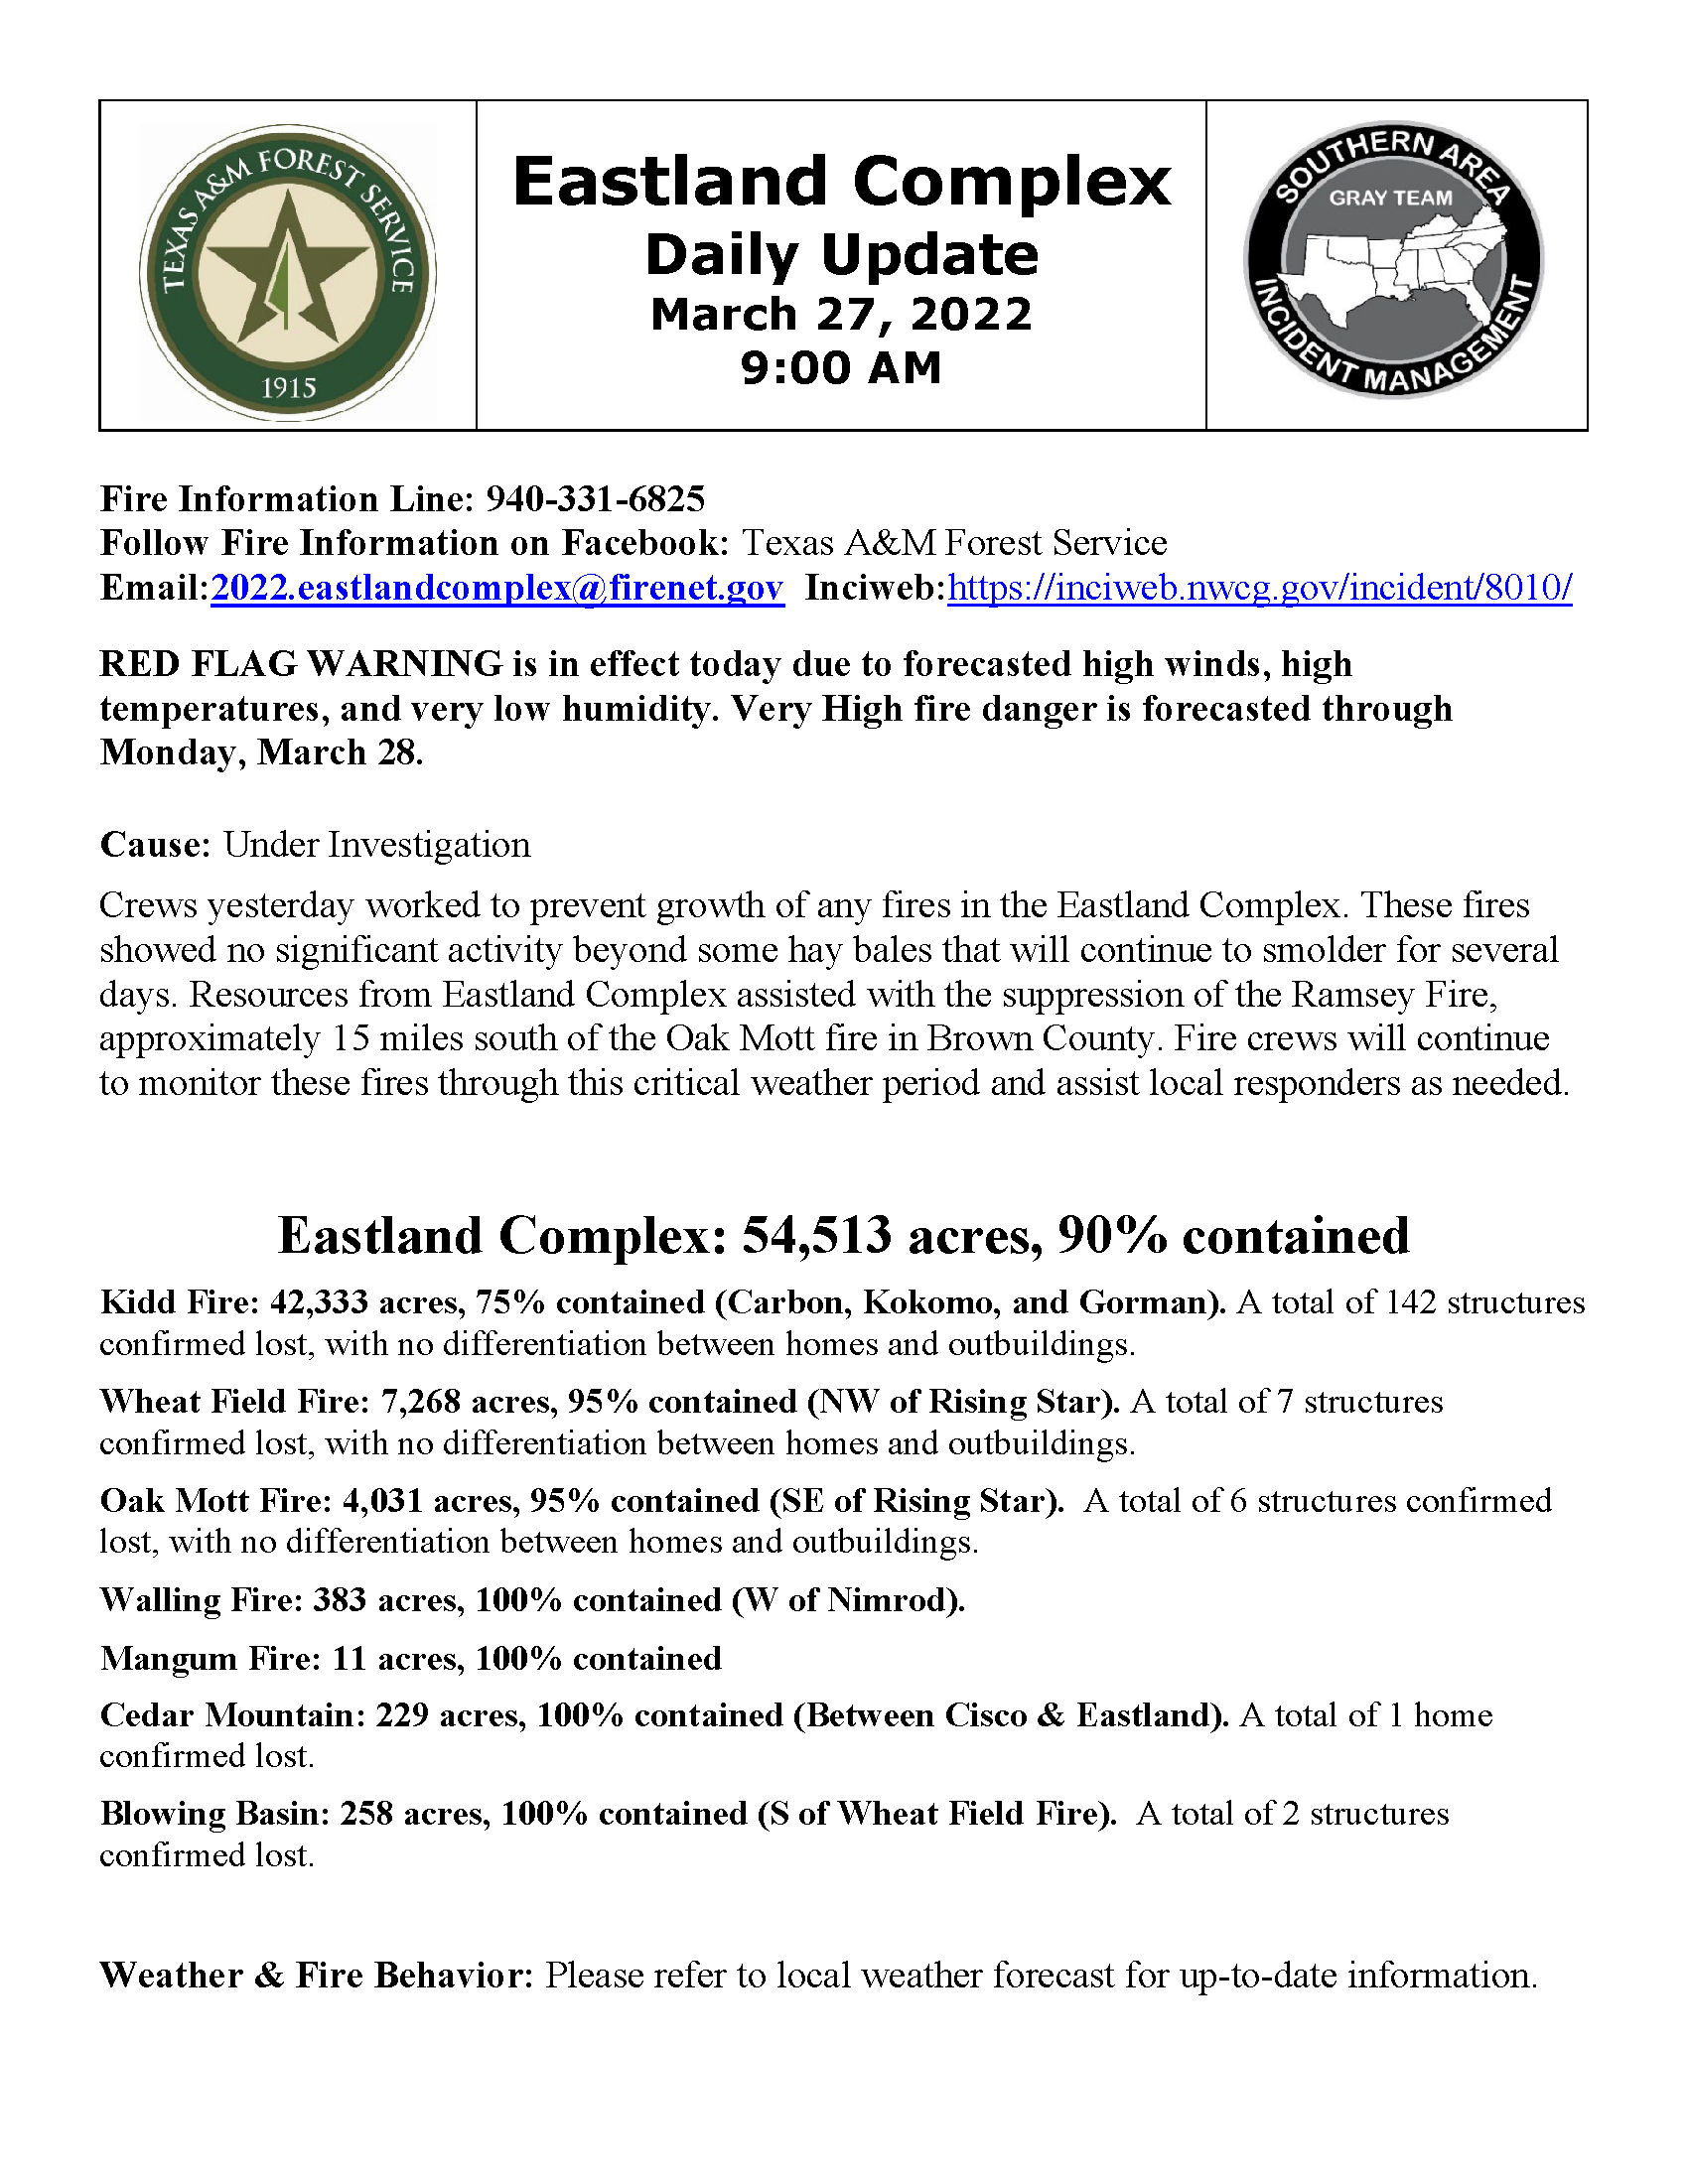 The document contains the March 27th daily update for Eastland Complex fire